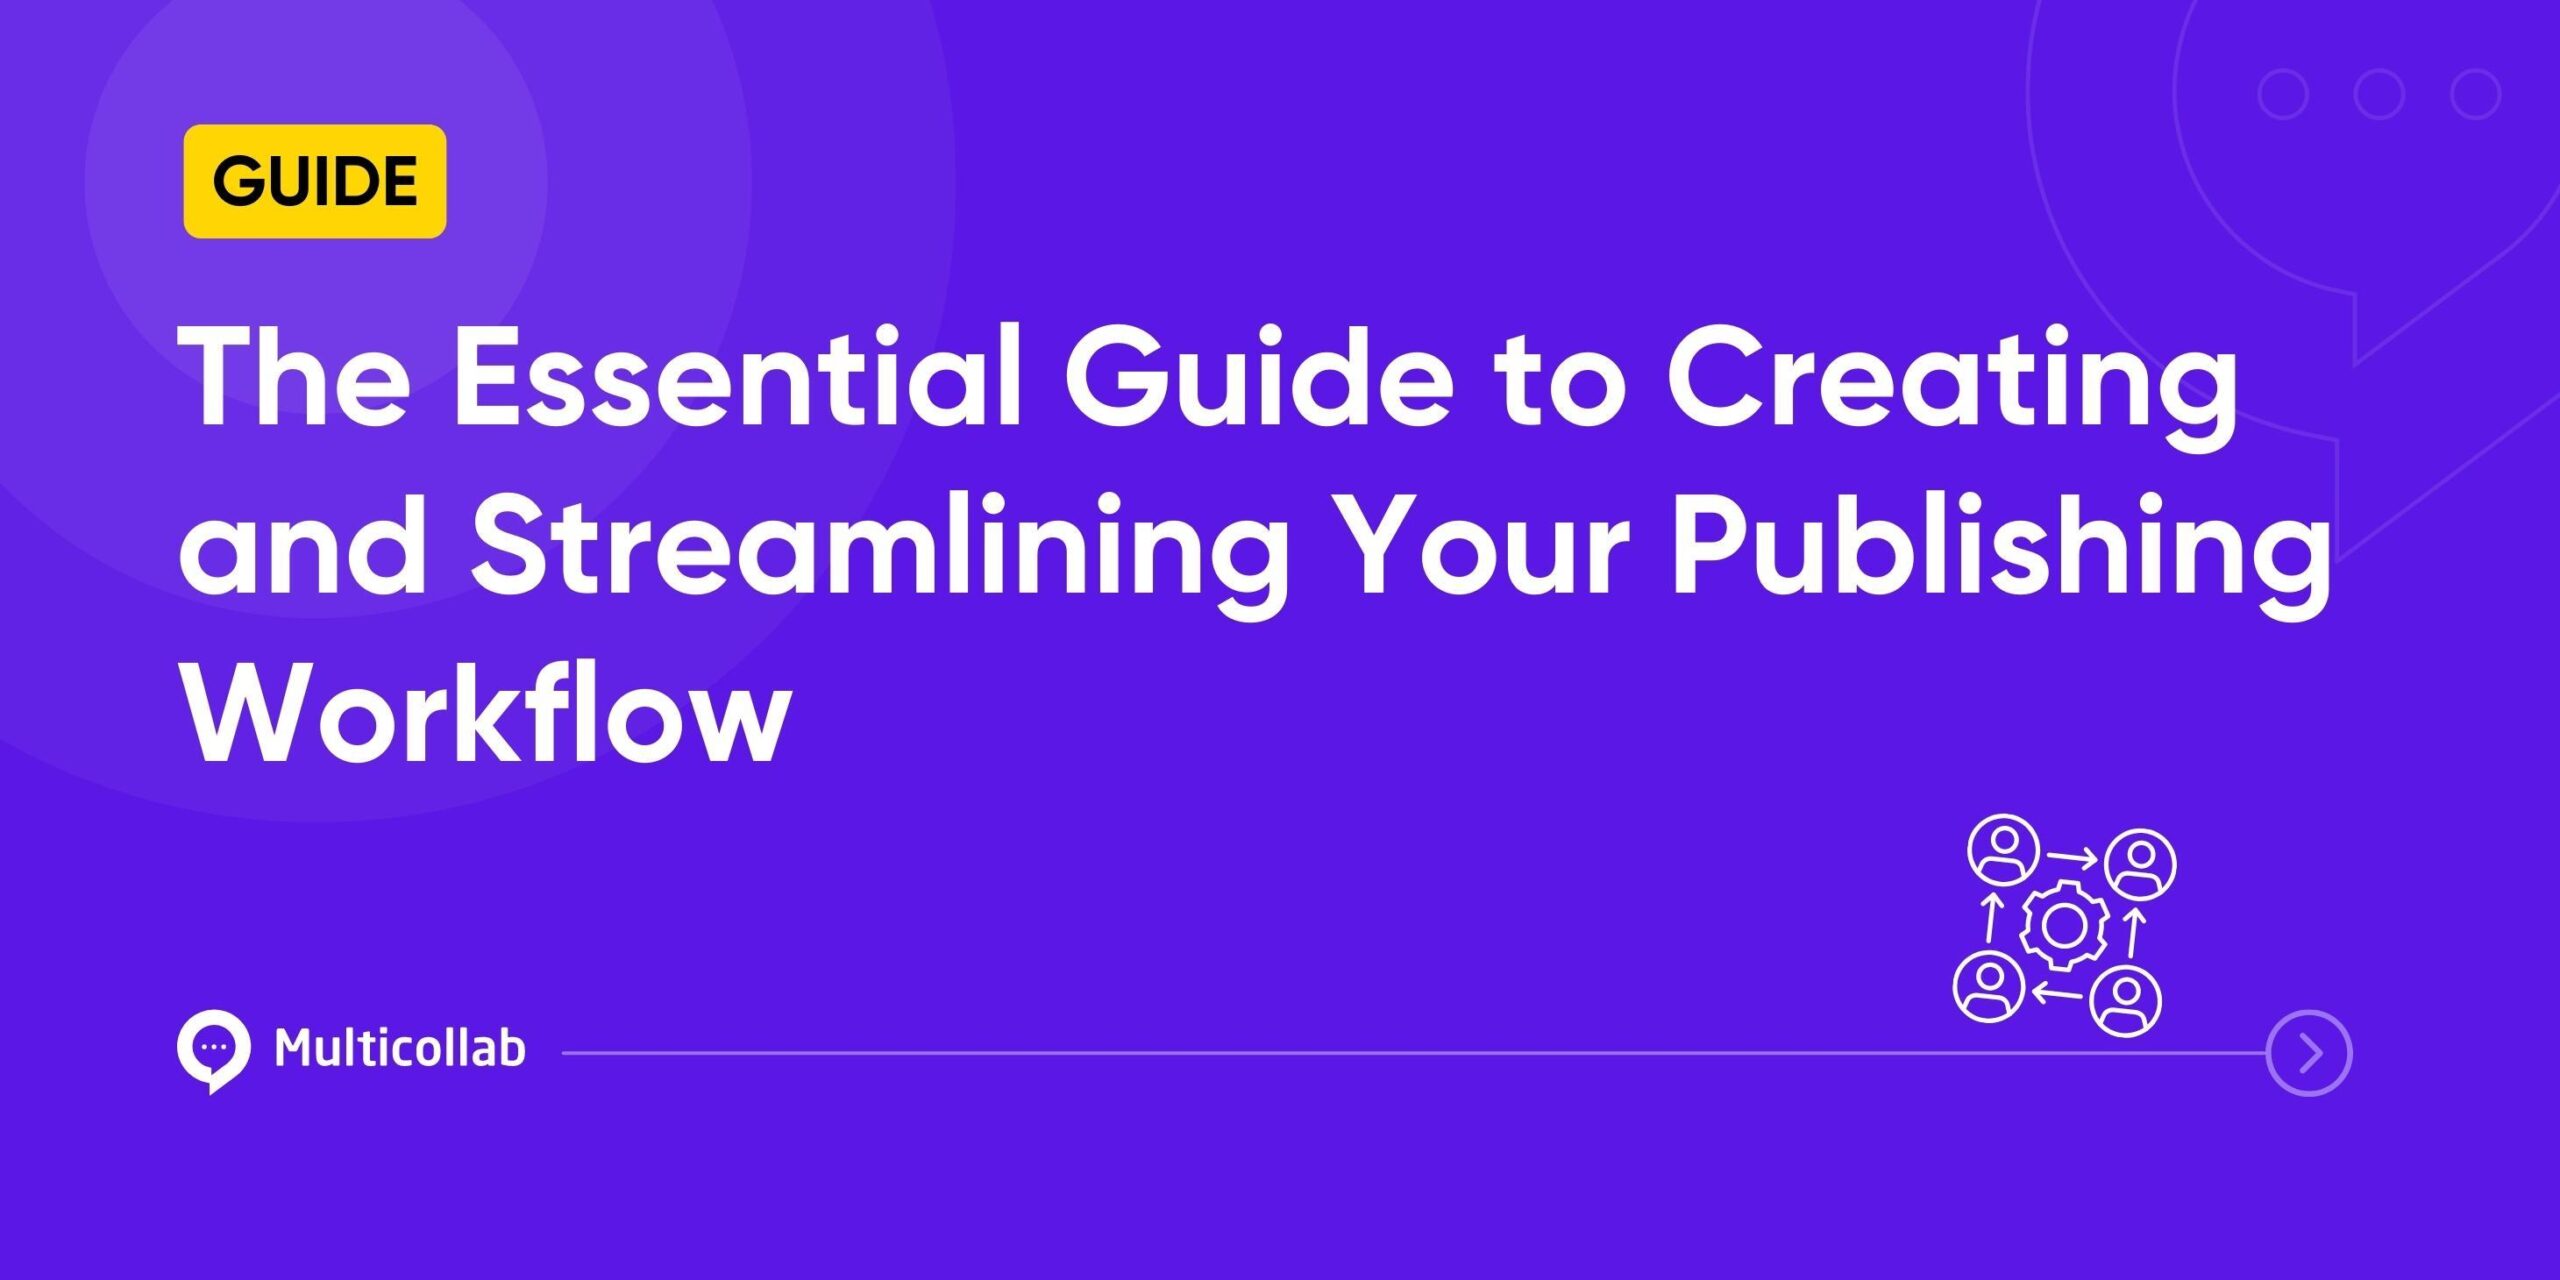 The Essential Guide to Creating and Streamlining Your Publishing Workflow